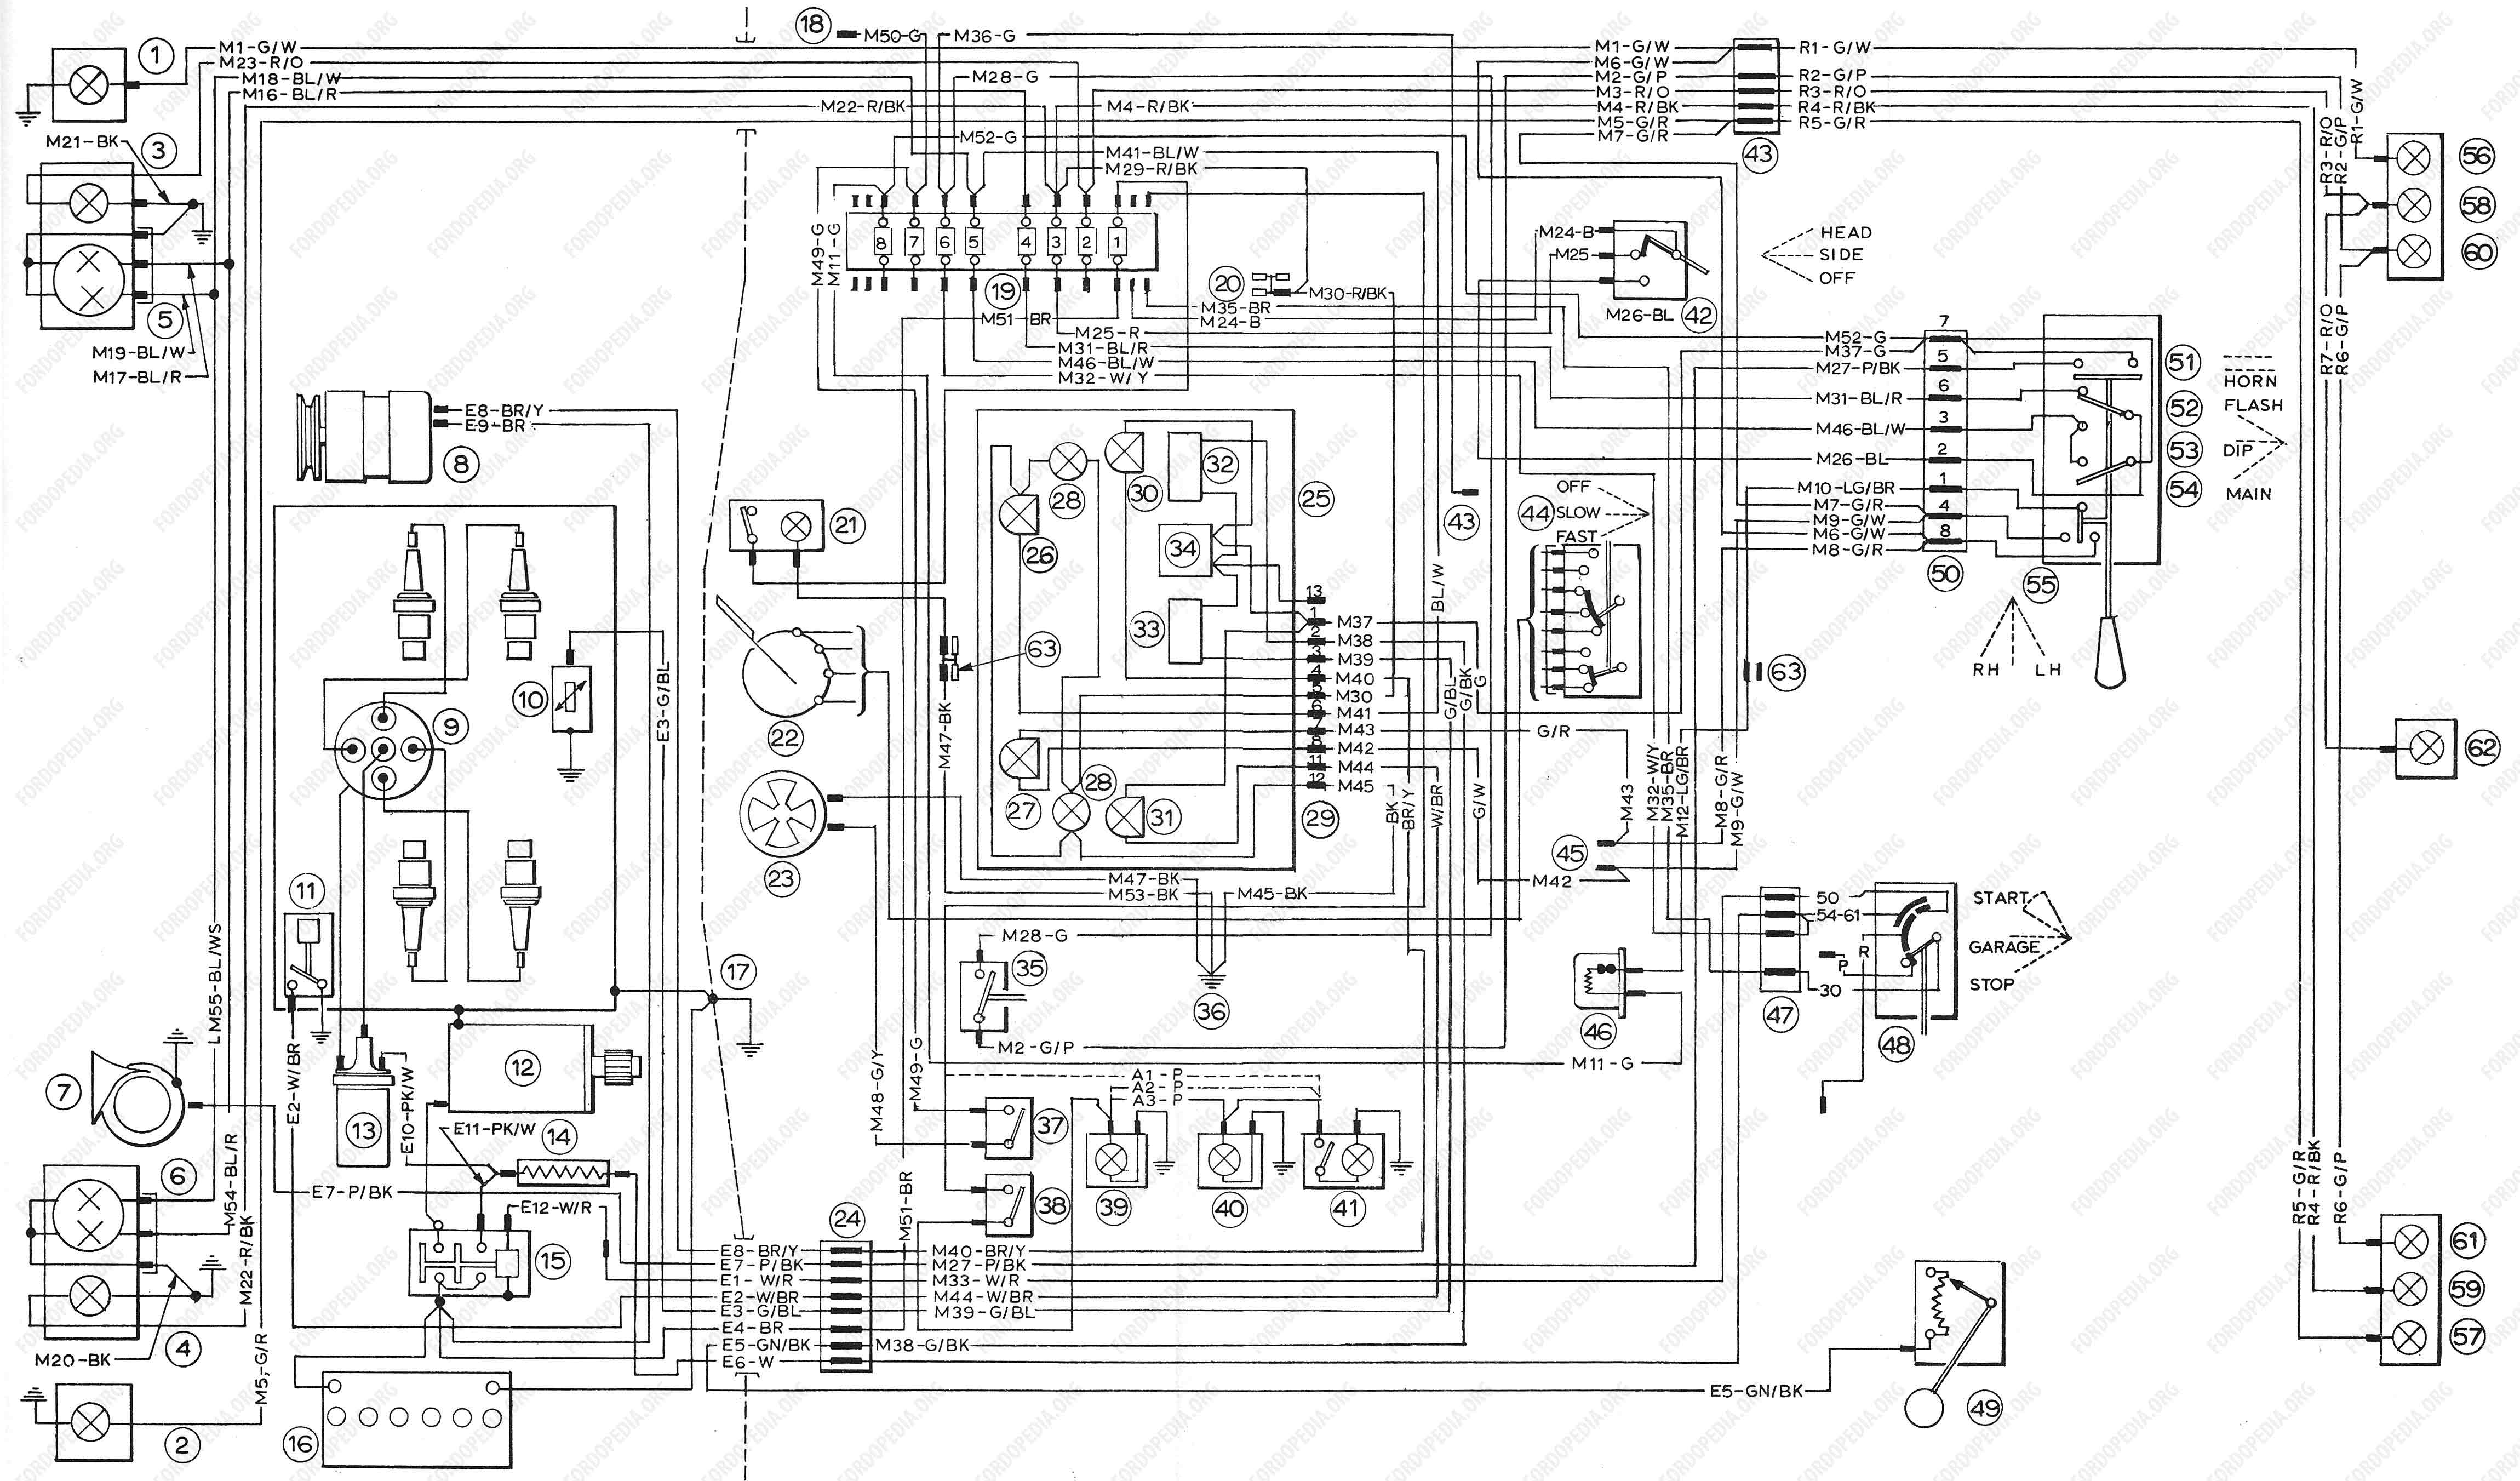 Ford transit connect wiring diagrams #7